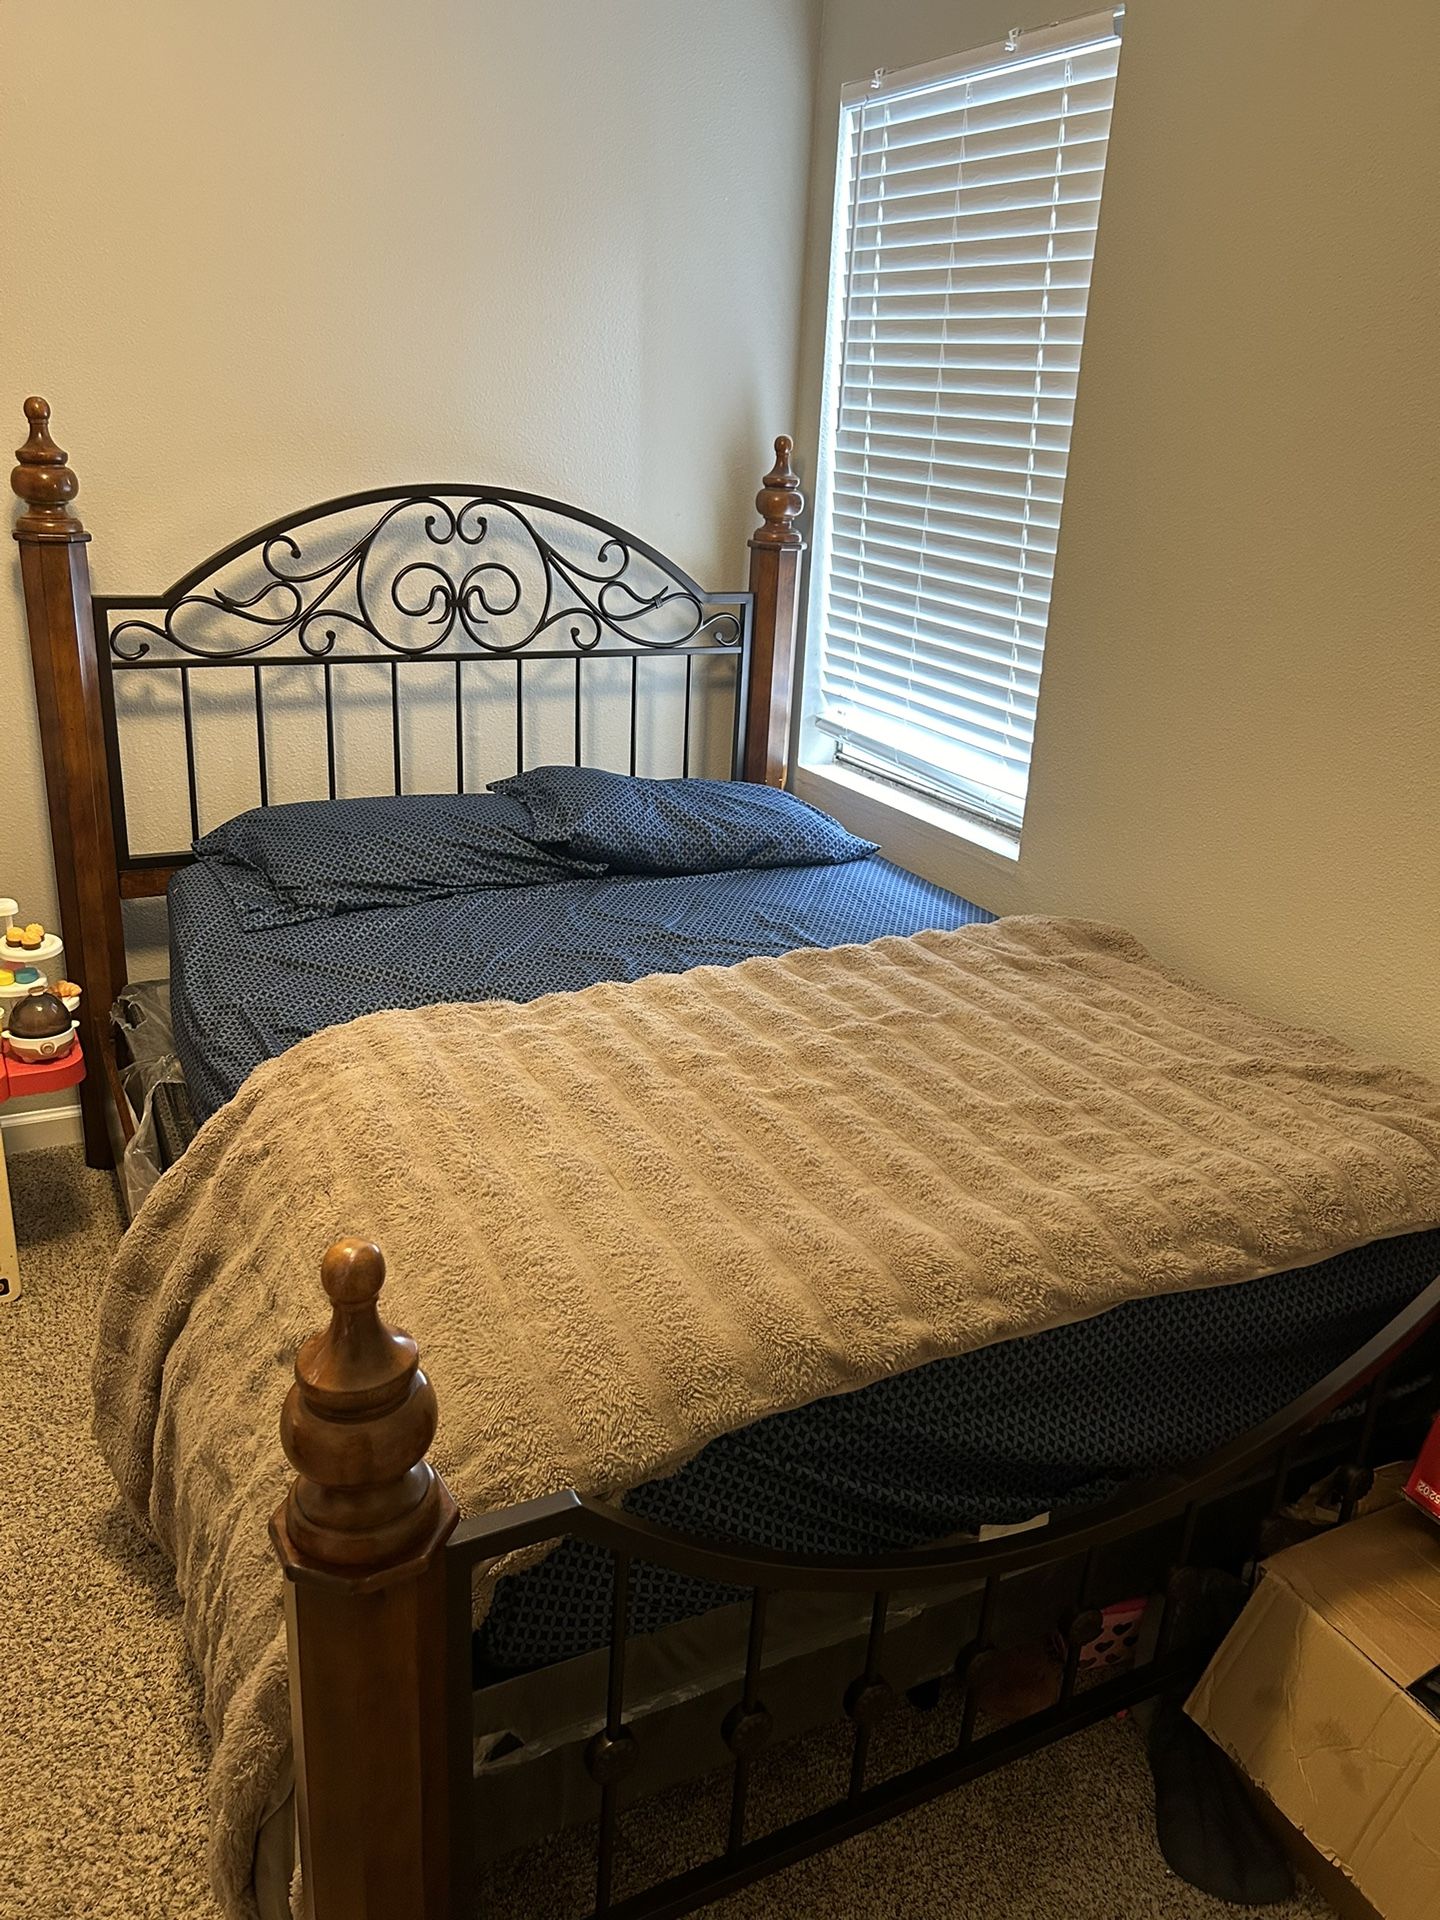 Queen Size Bed, Mattress and Box Spring